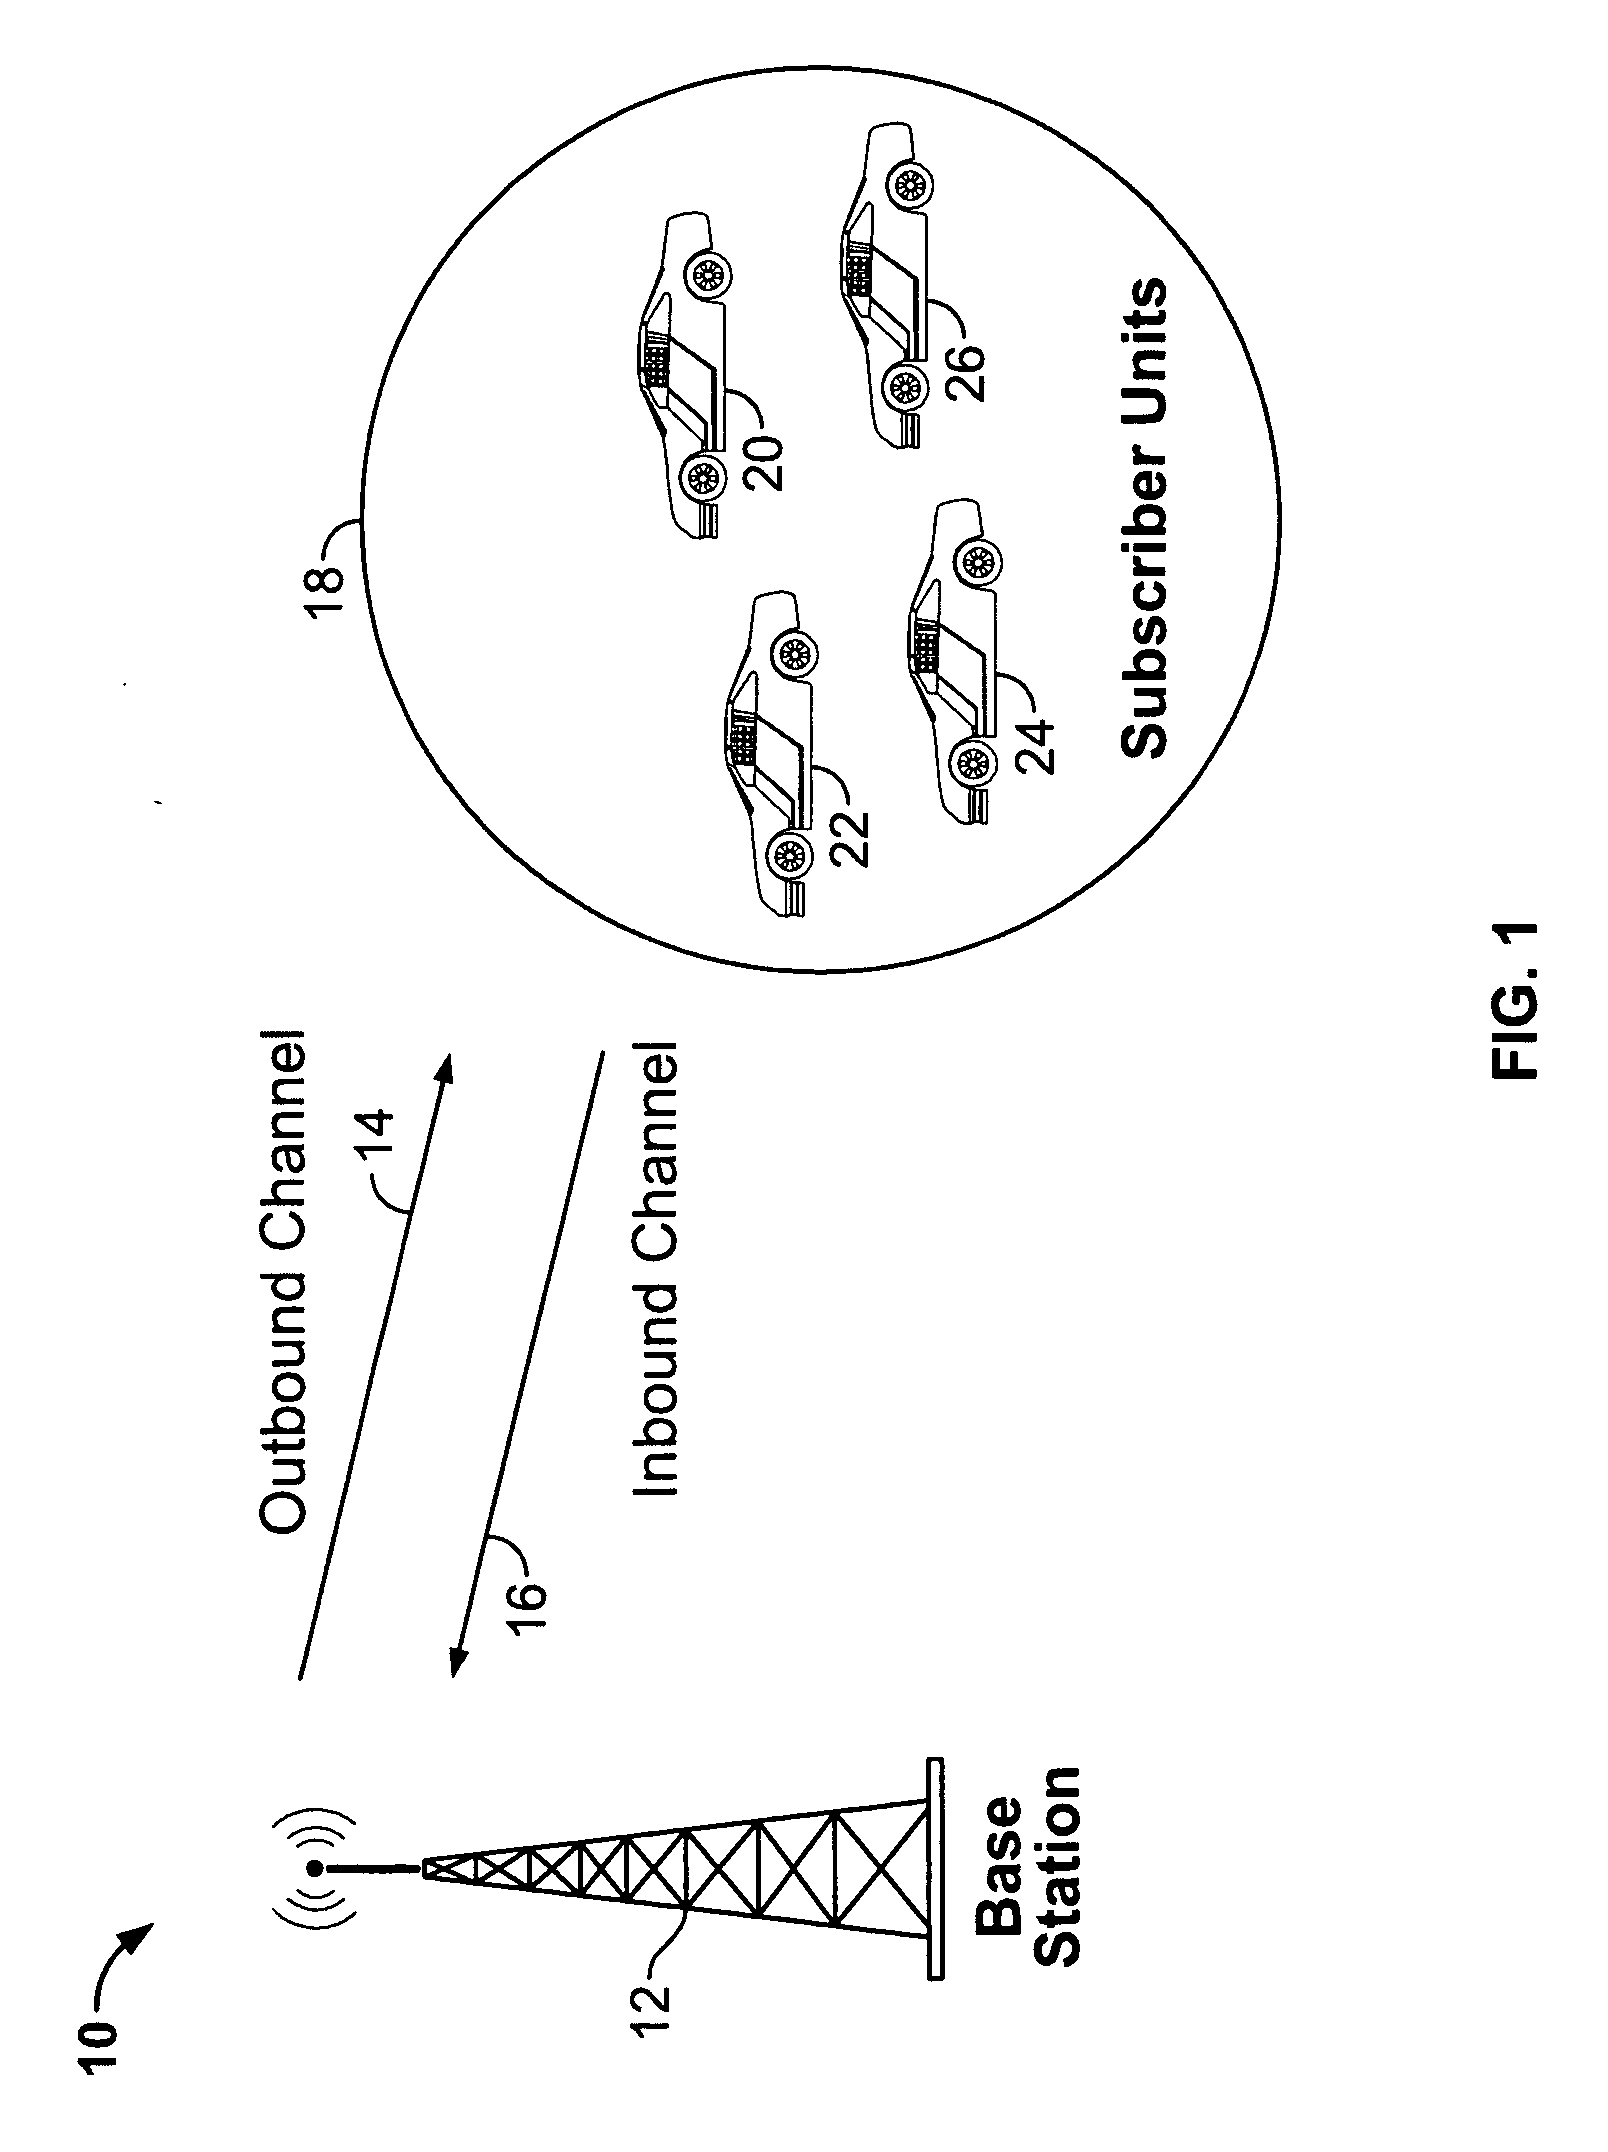 System and method for retransmission of voice packets in wireless communications